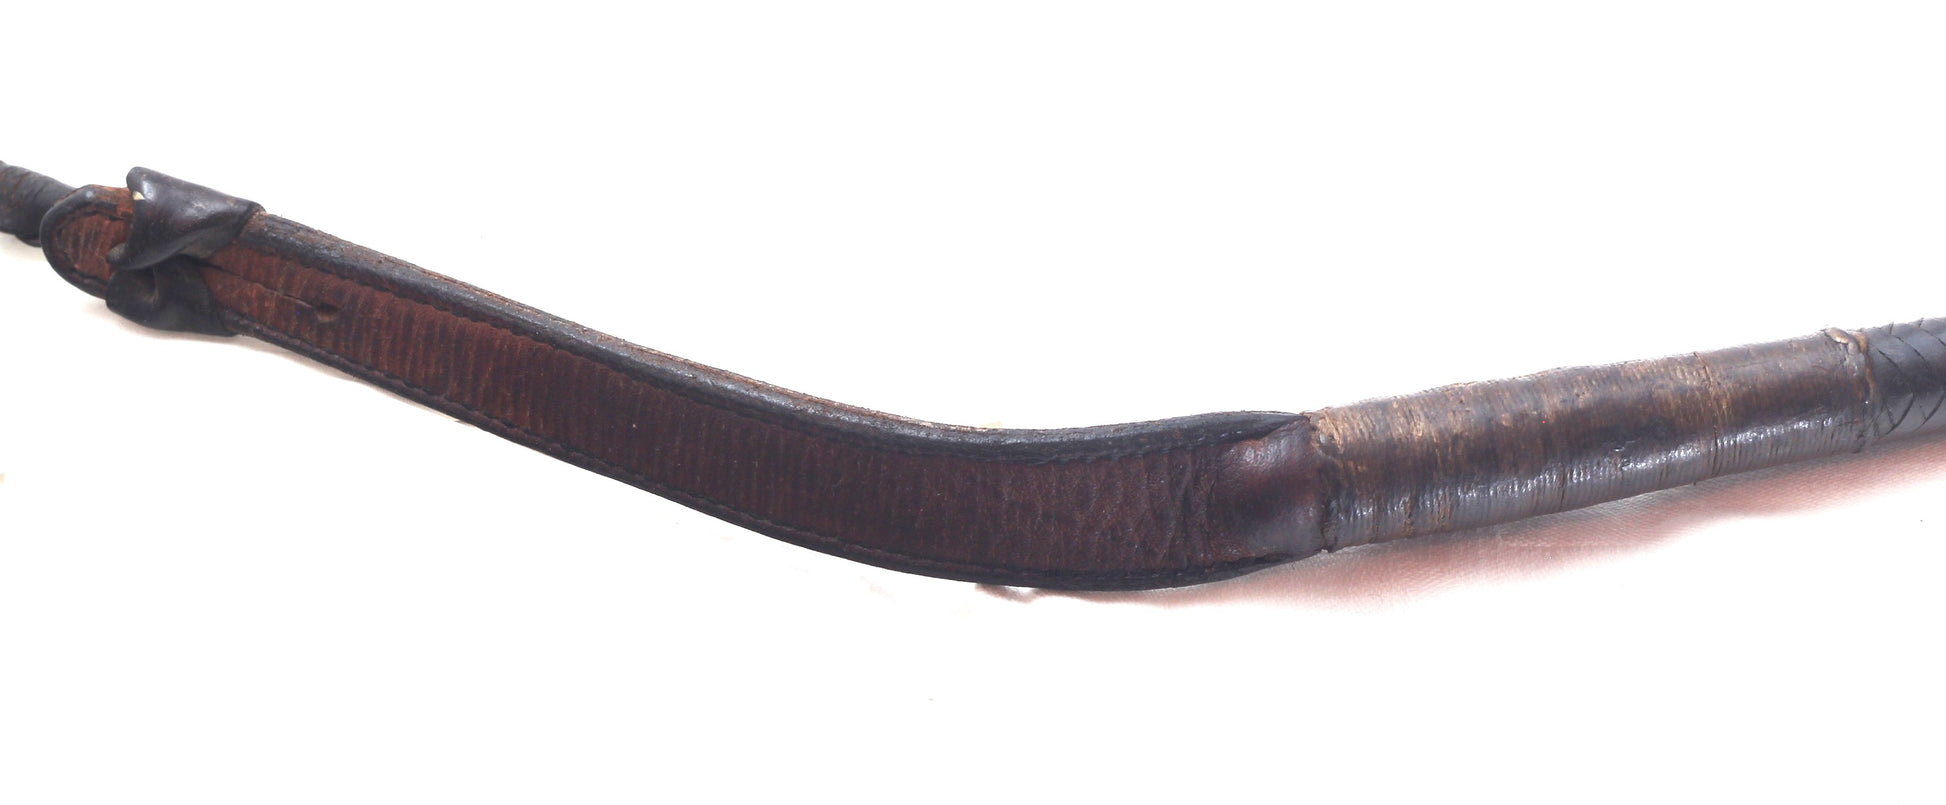 1933 Leather Ladies Hunting Whip with Thong